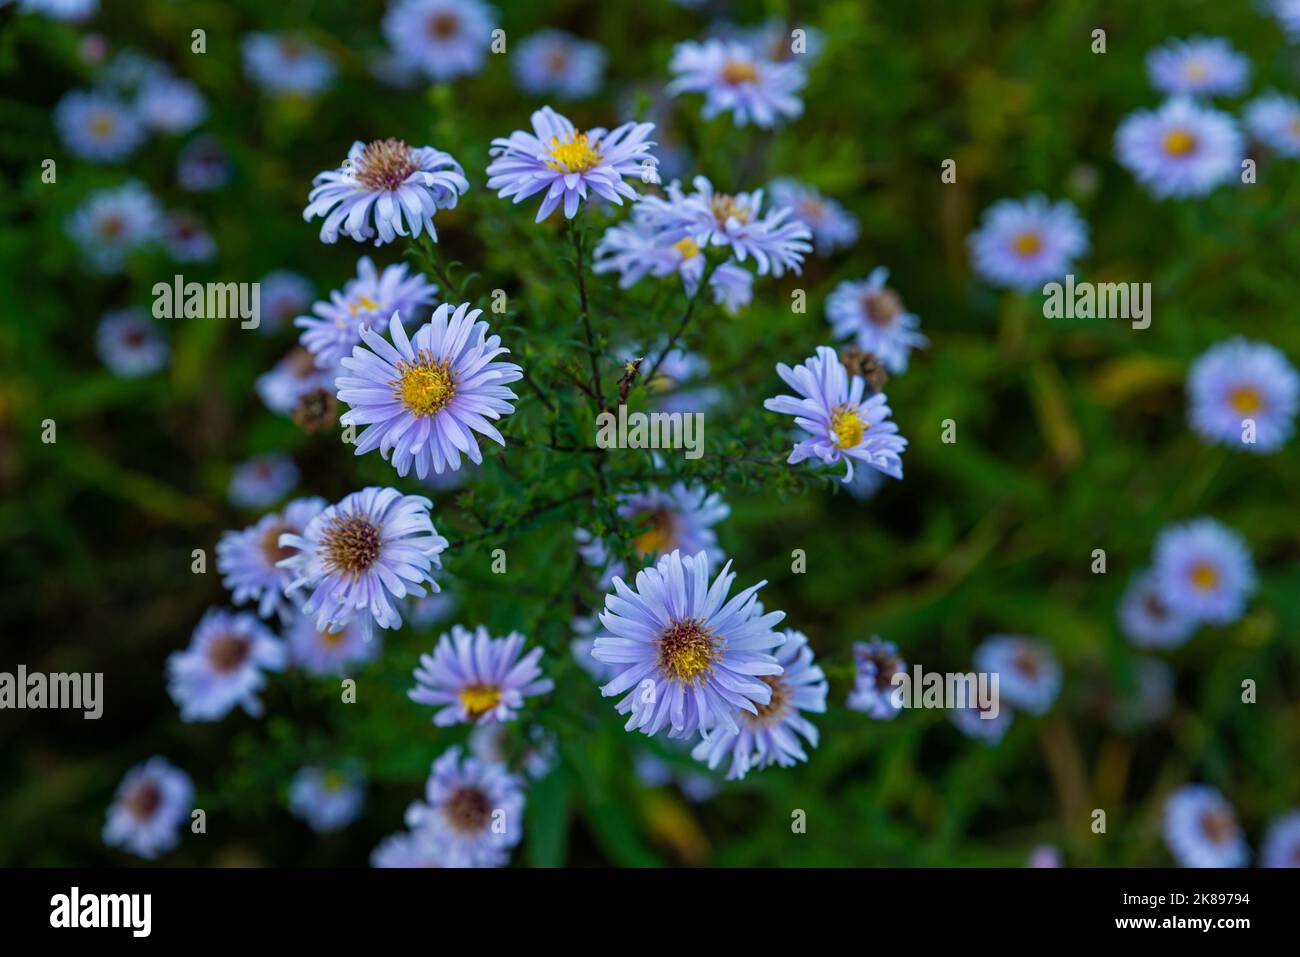 Aster dumosus Blue Lagoon ( pillows Aster ). Blue cushion asters bloom in garden. Aster novi-belgii blossom in german park. Autumn background with blu Stock Photo